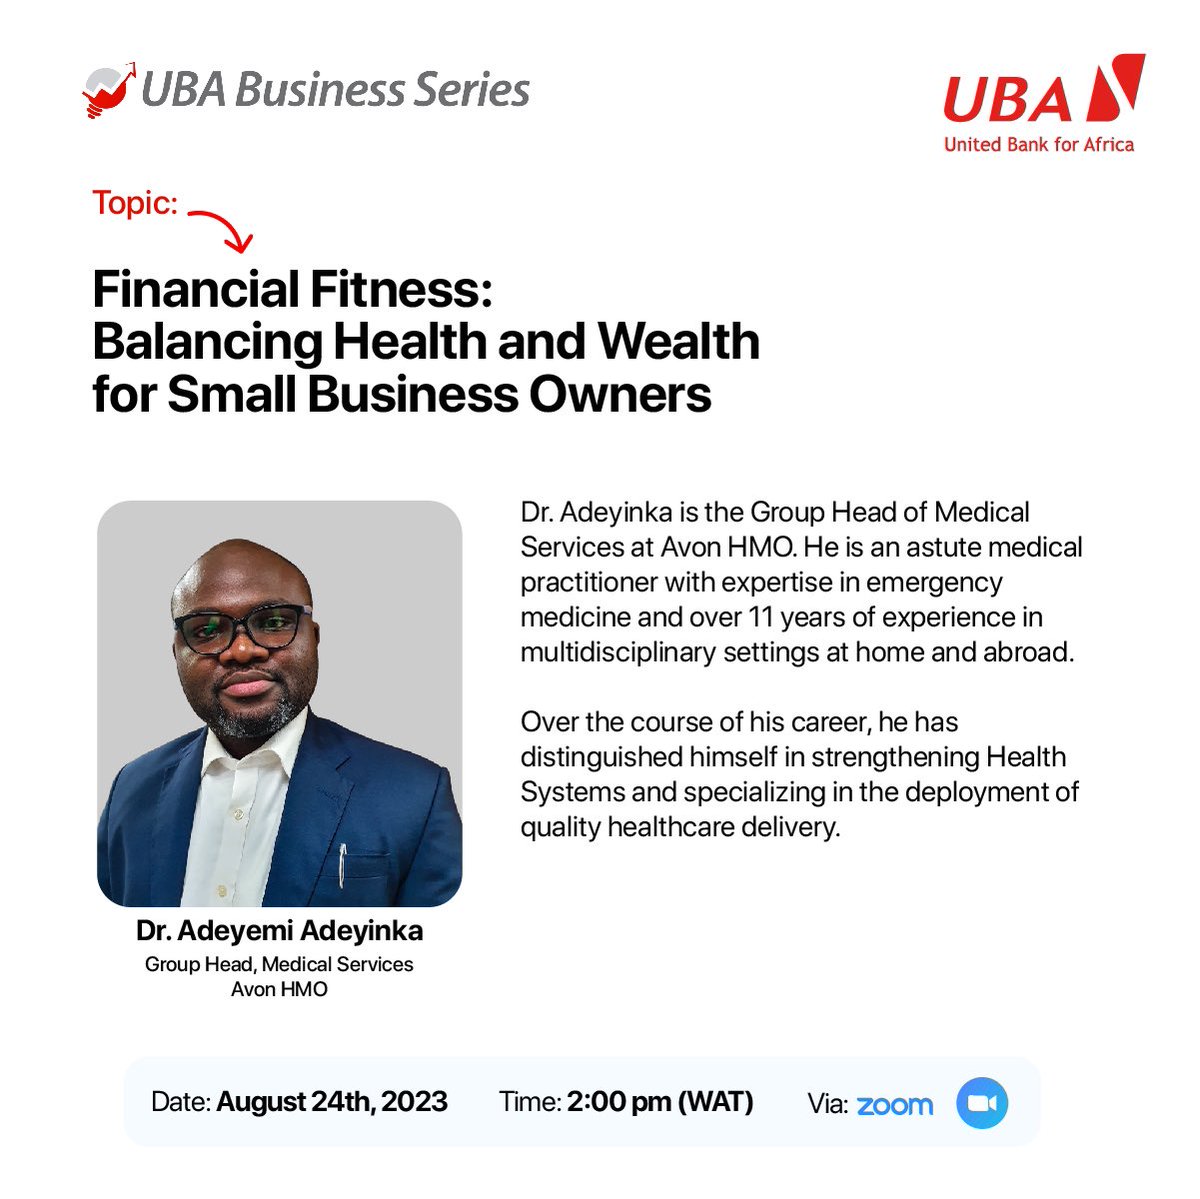 Join the @UBAGroup zoom meeting and learn from experts like Dr. Adeyemi Adeyinka on how to grow your business and look after your health at same time.

#UBABusinessSeries